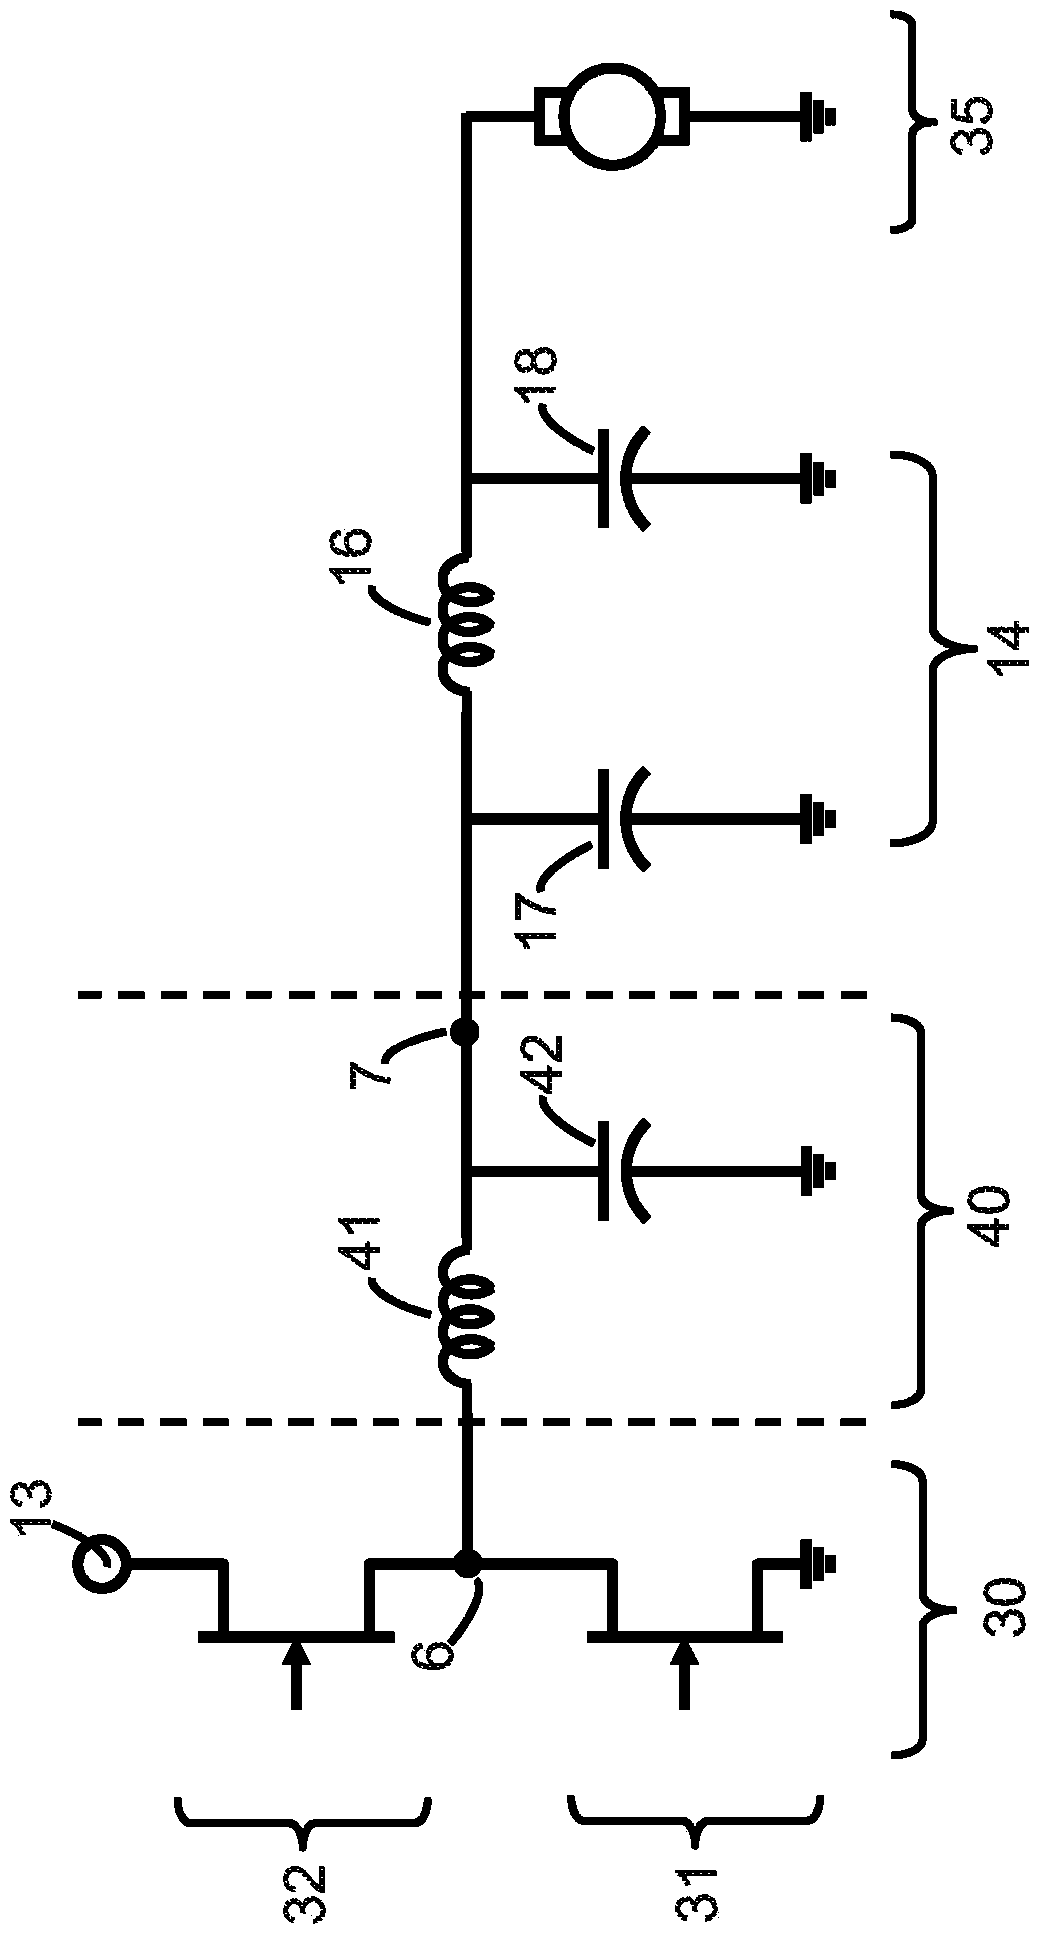 Electronic components with reactive filters